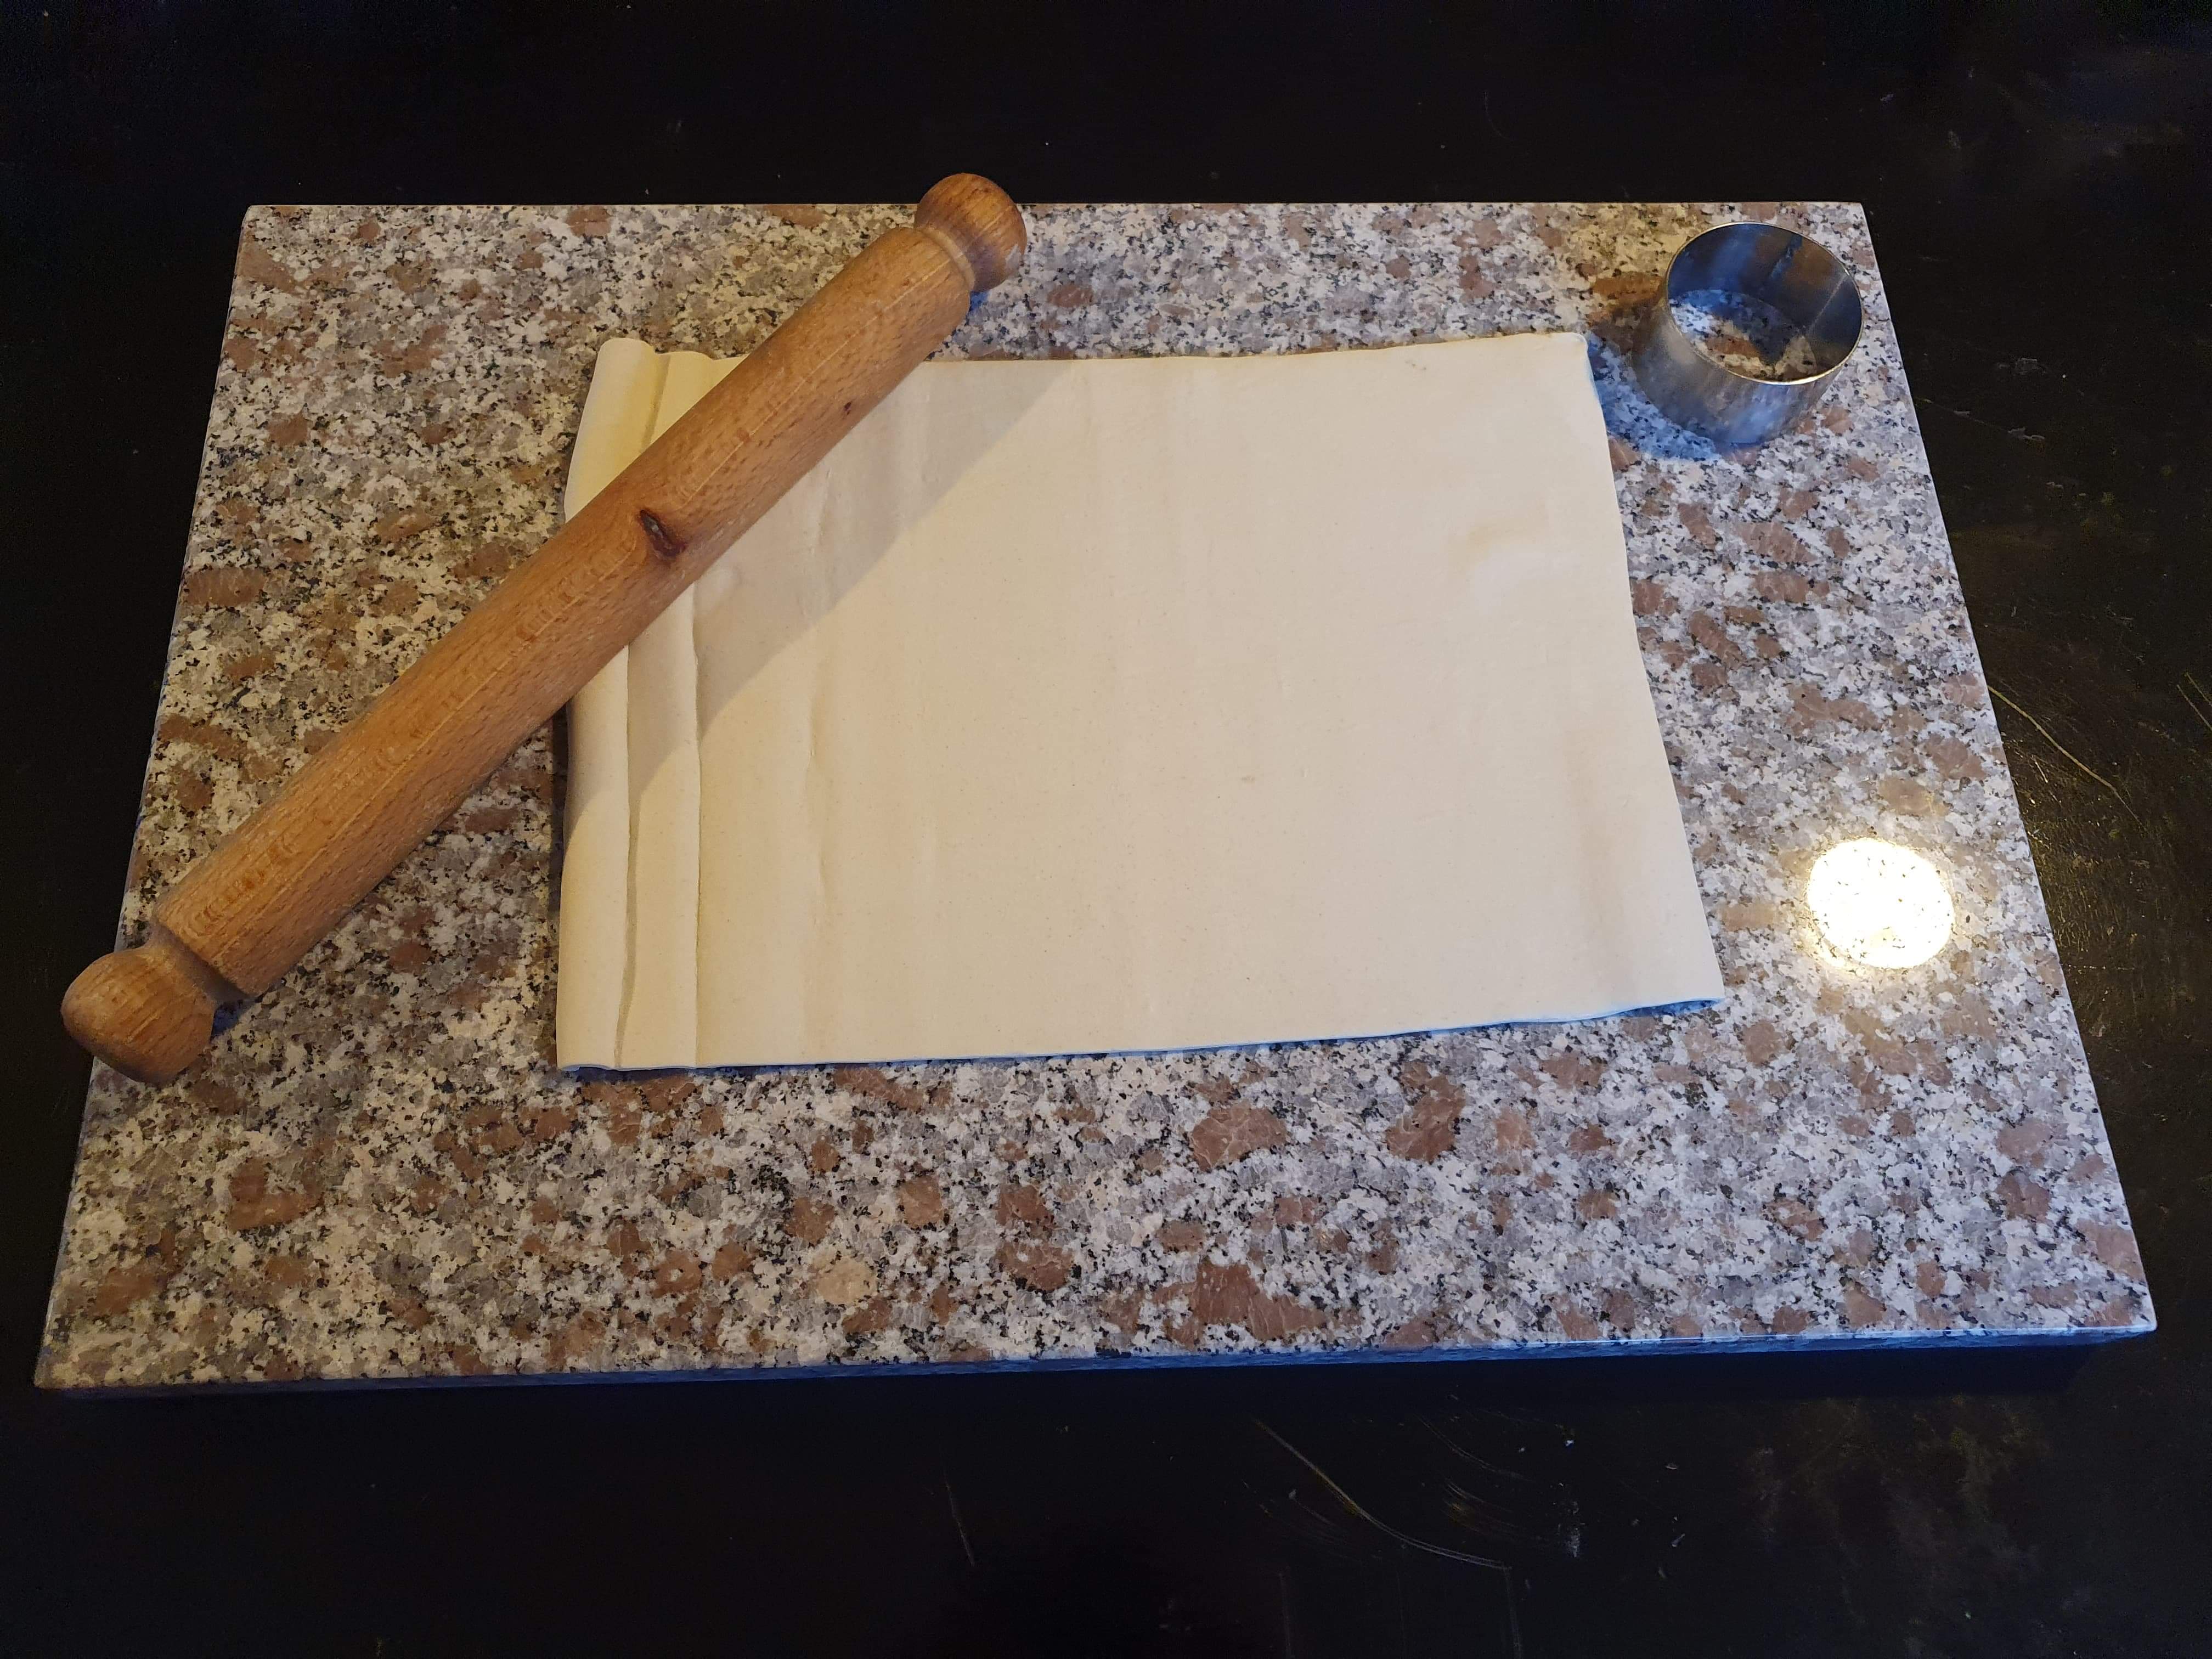 Makes making pastry so much easier with this granite pastry board